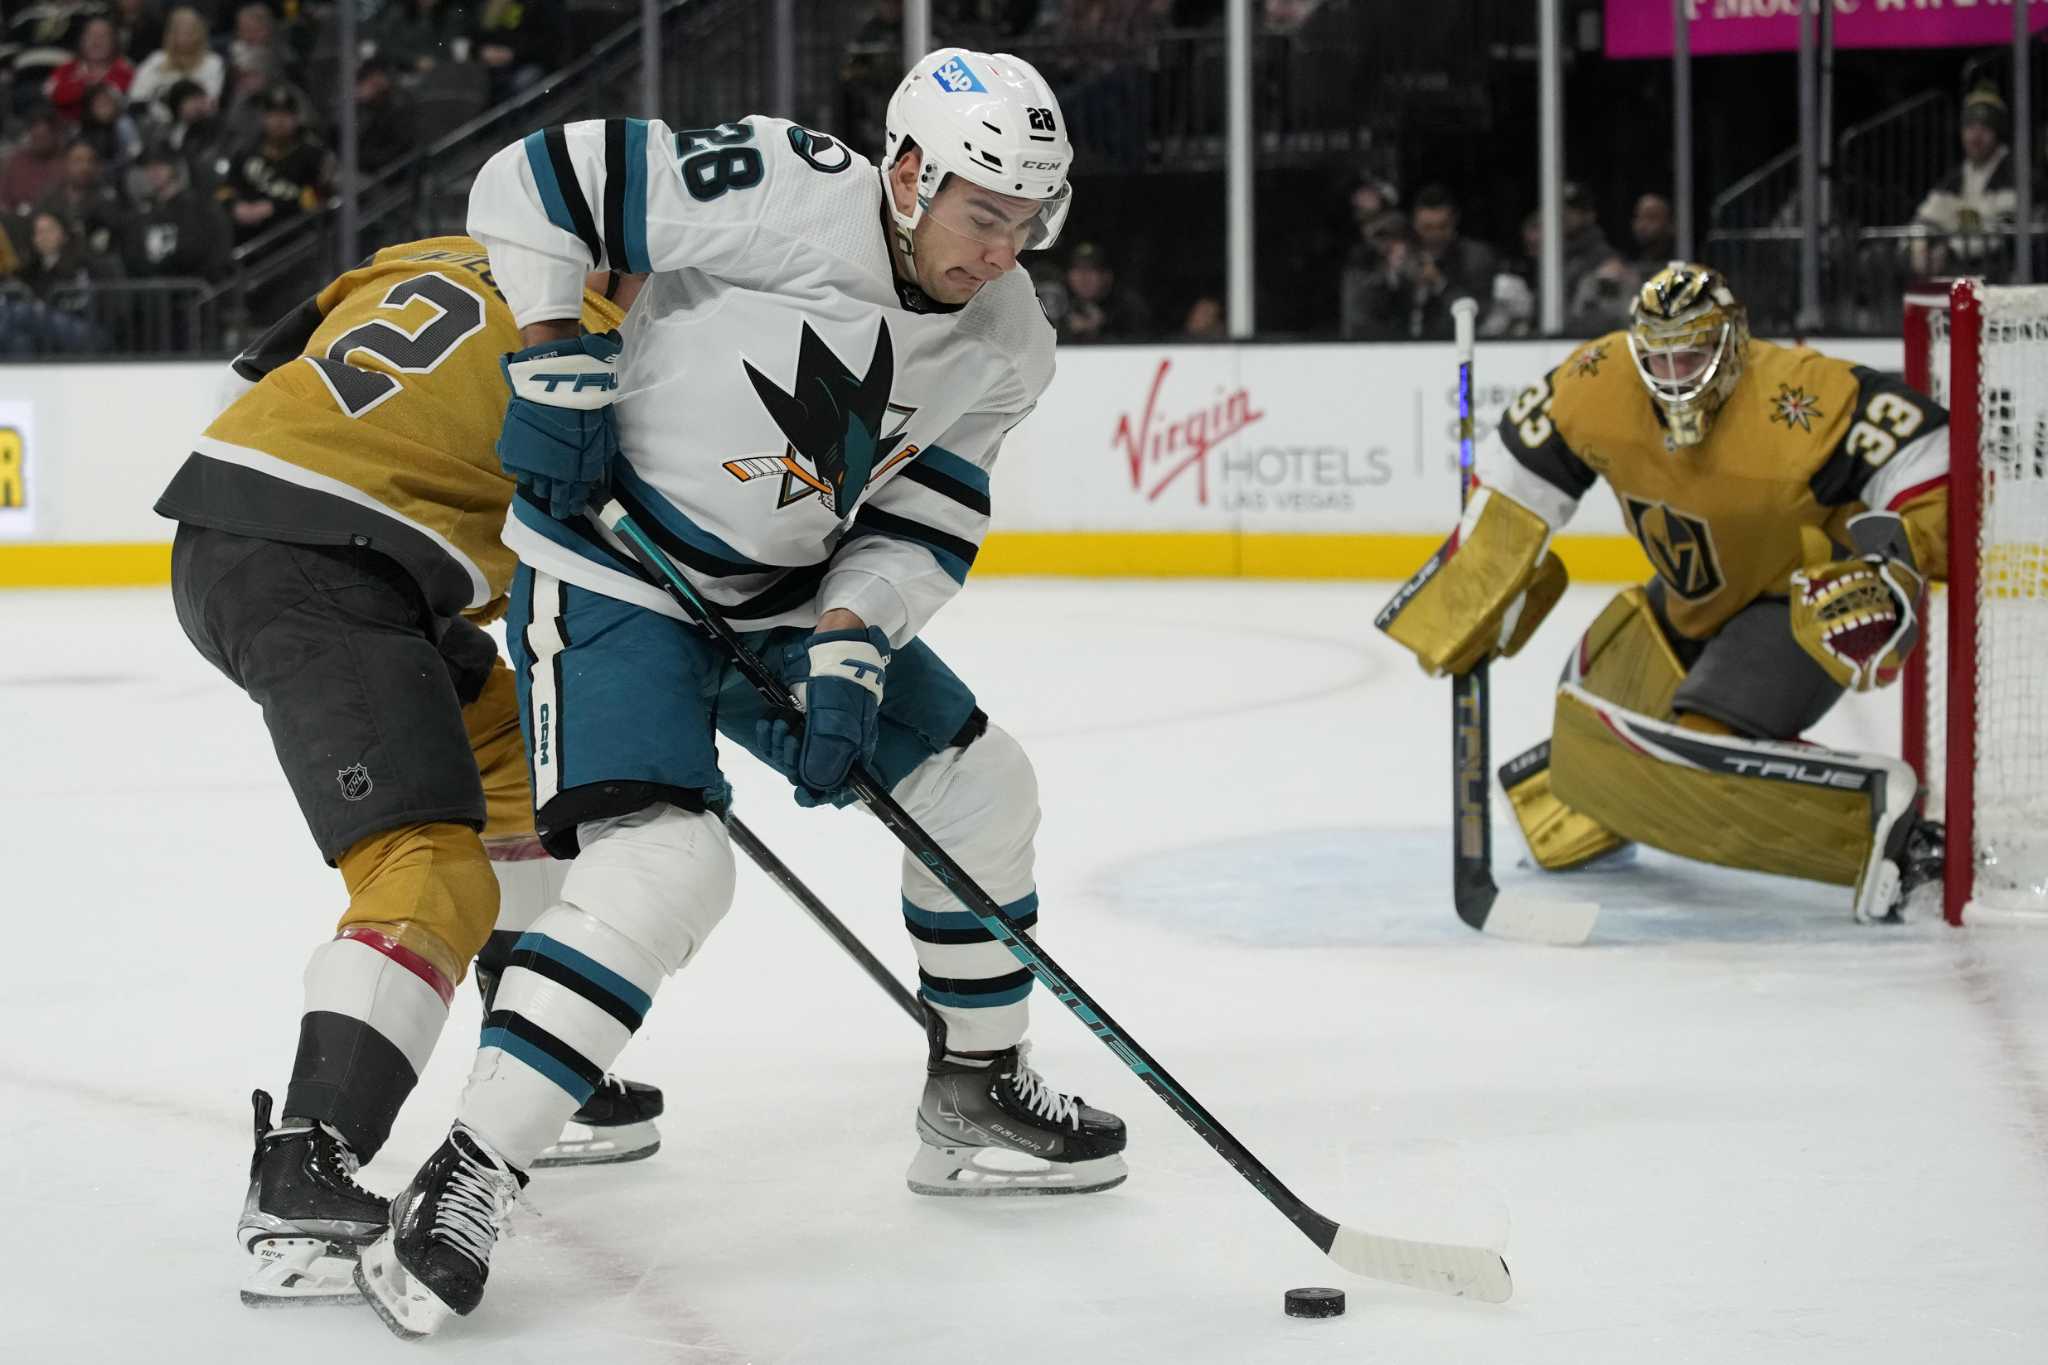 If the Sharks trade Timo Meier, which teams are the best potential